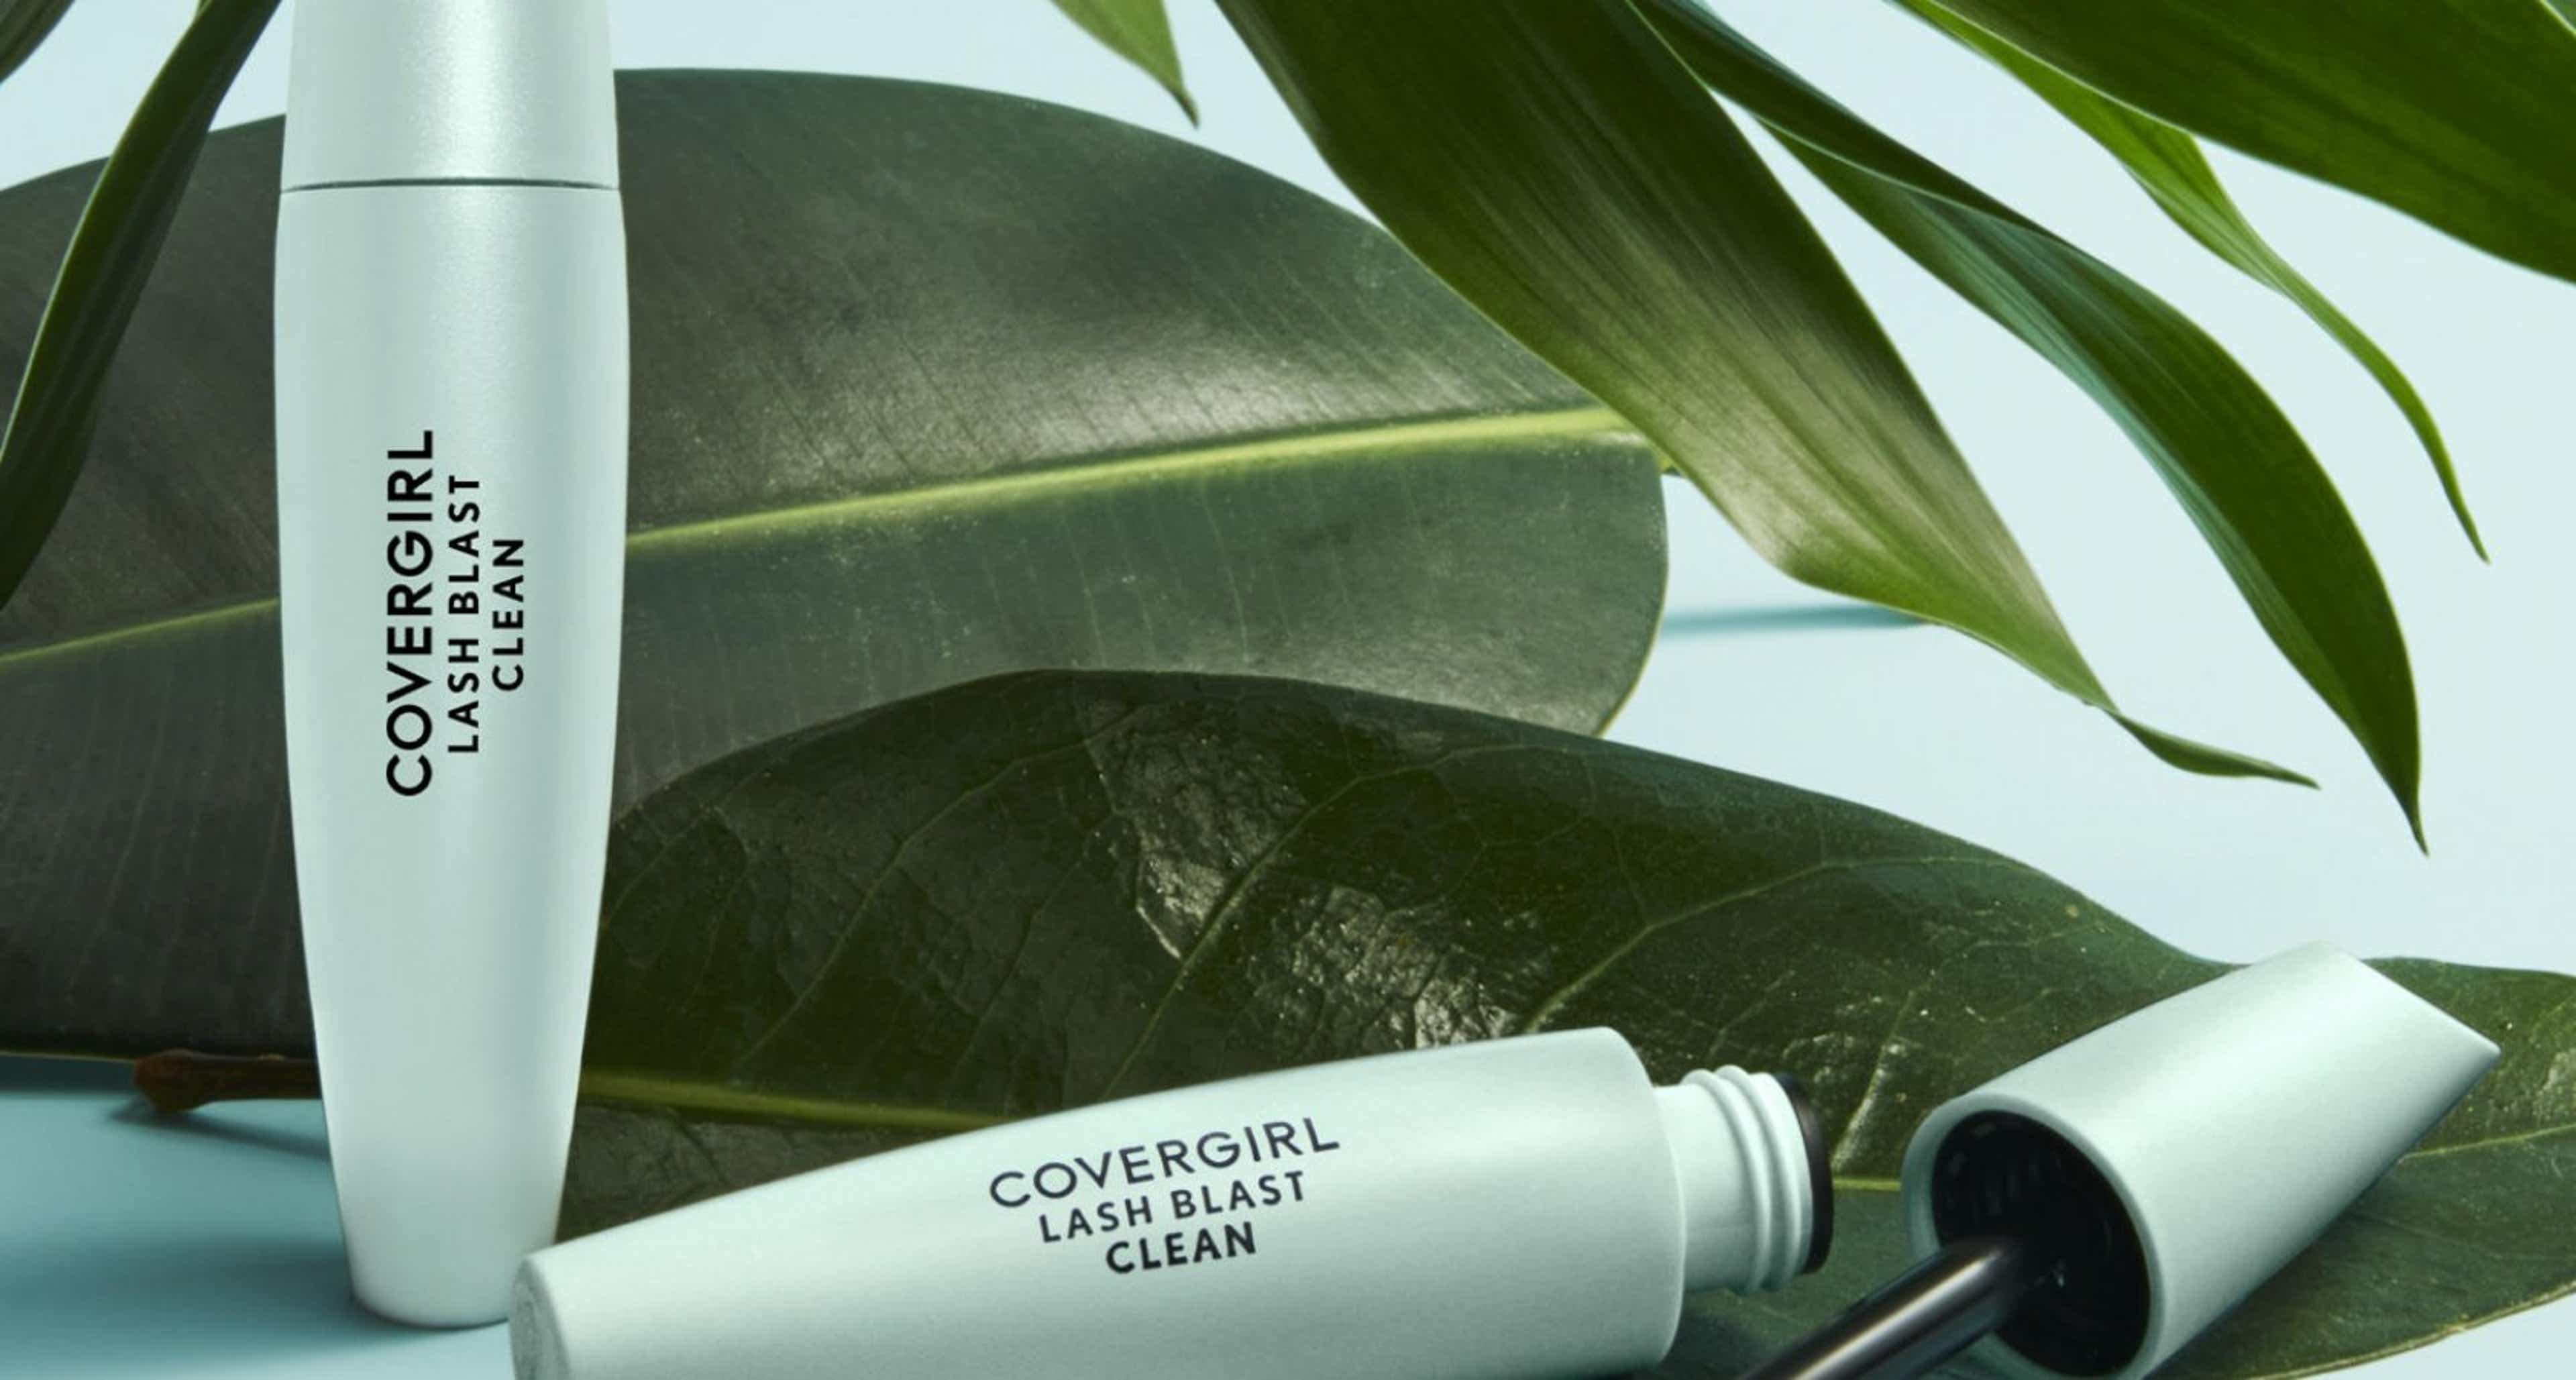 COVERGIRL launches Lash Blast Clean Volume, its first clean mascara